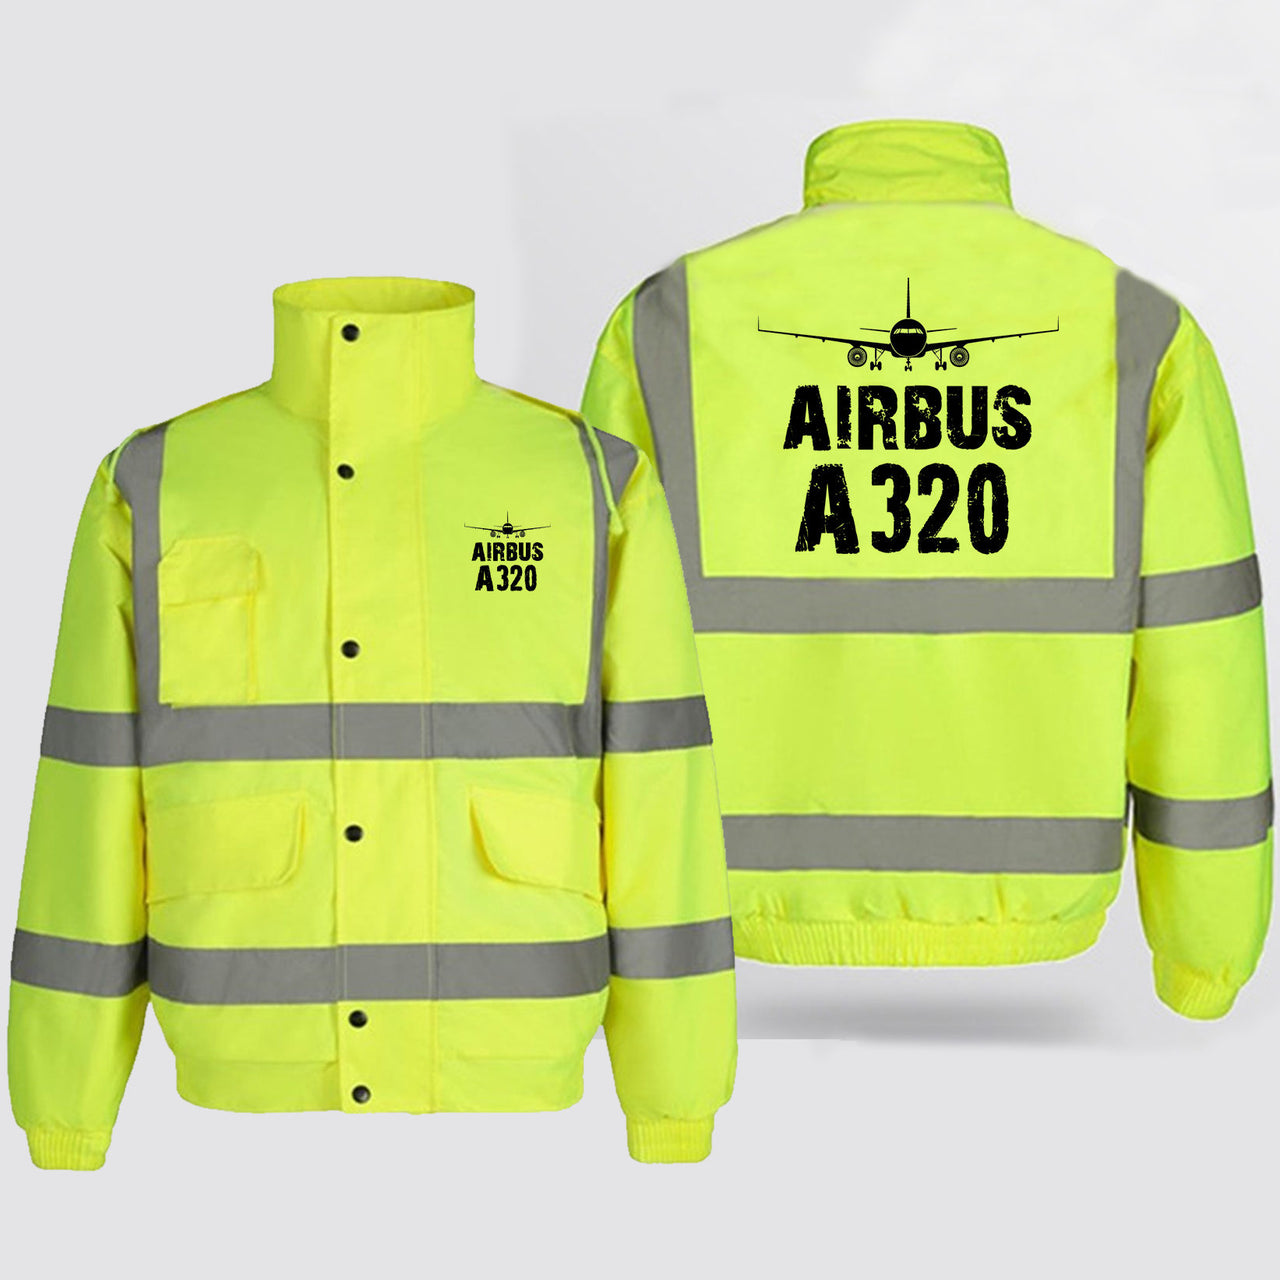 Airbus A320 & Plane Designed Reflective Winter Jackets